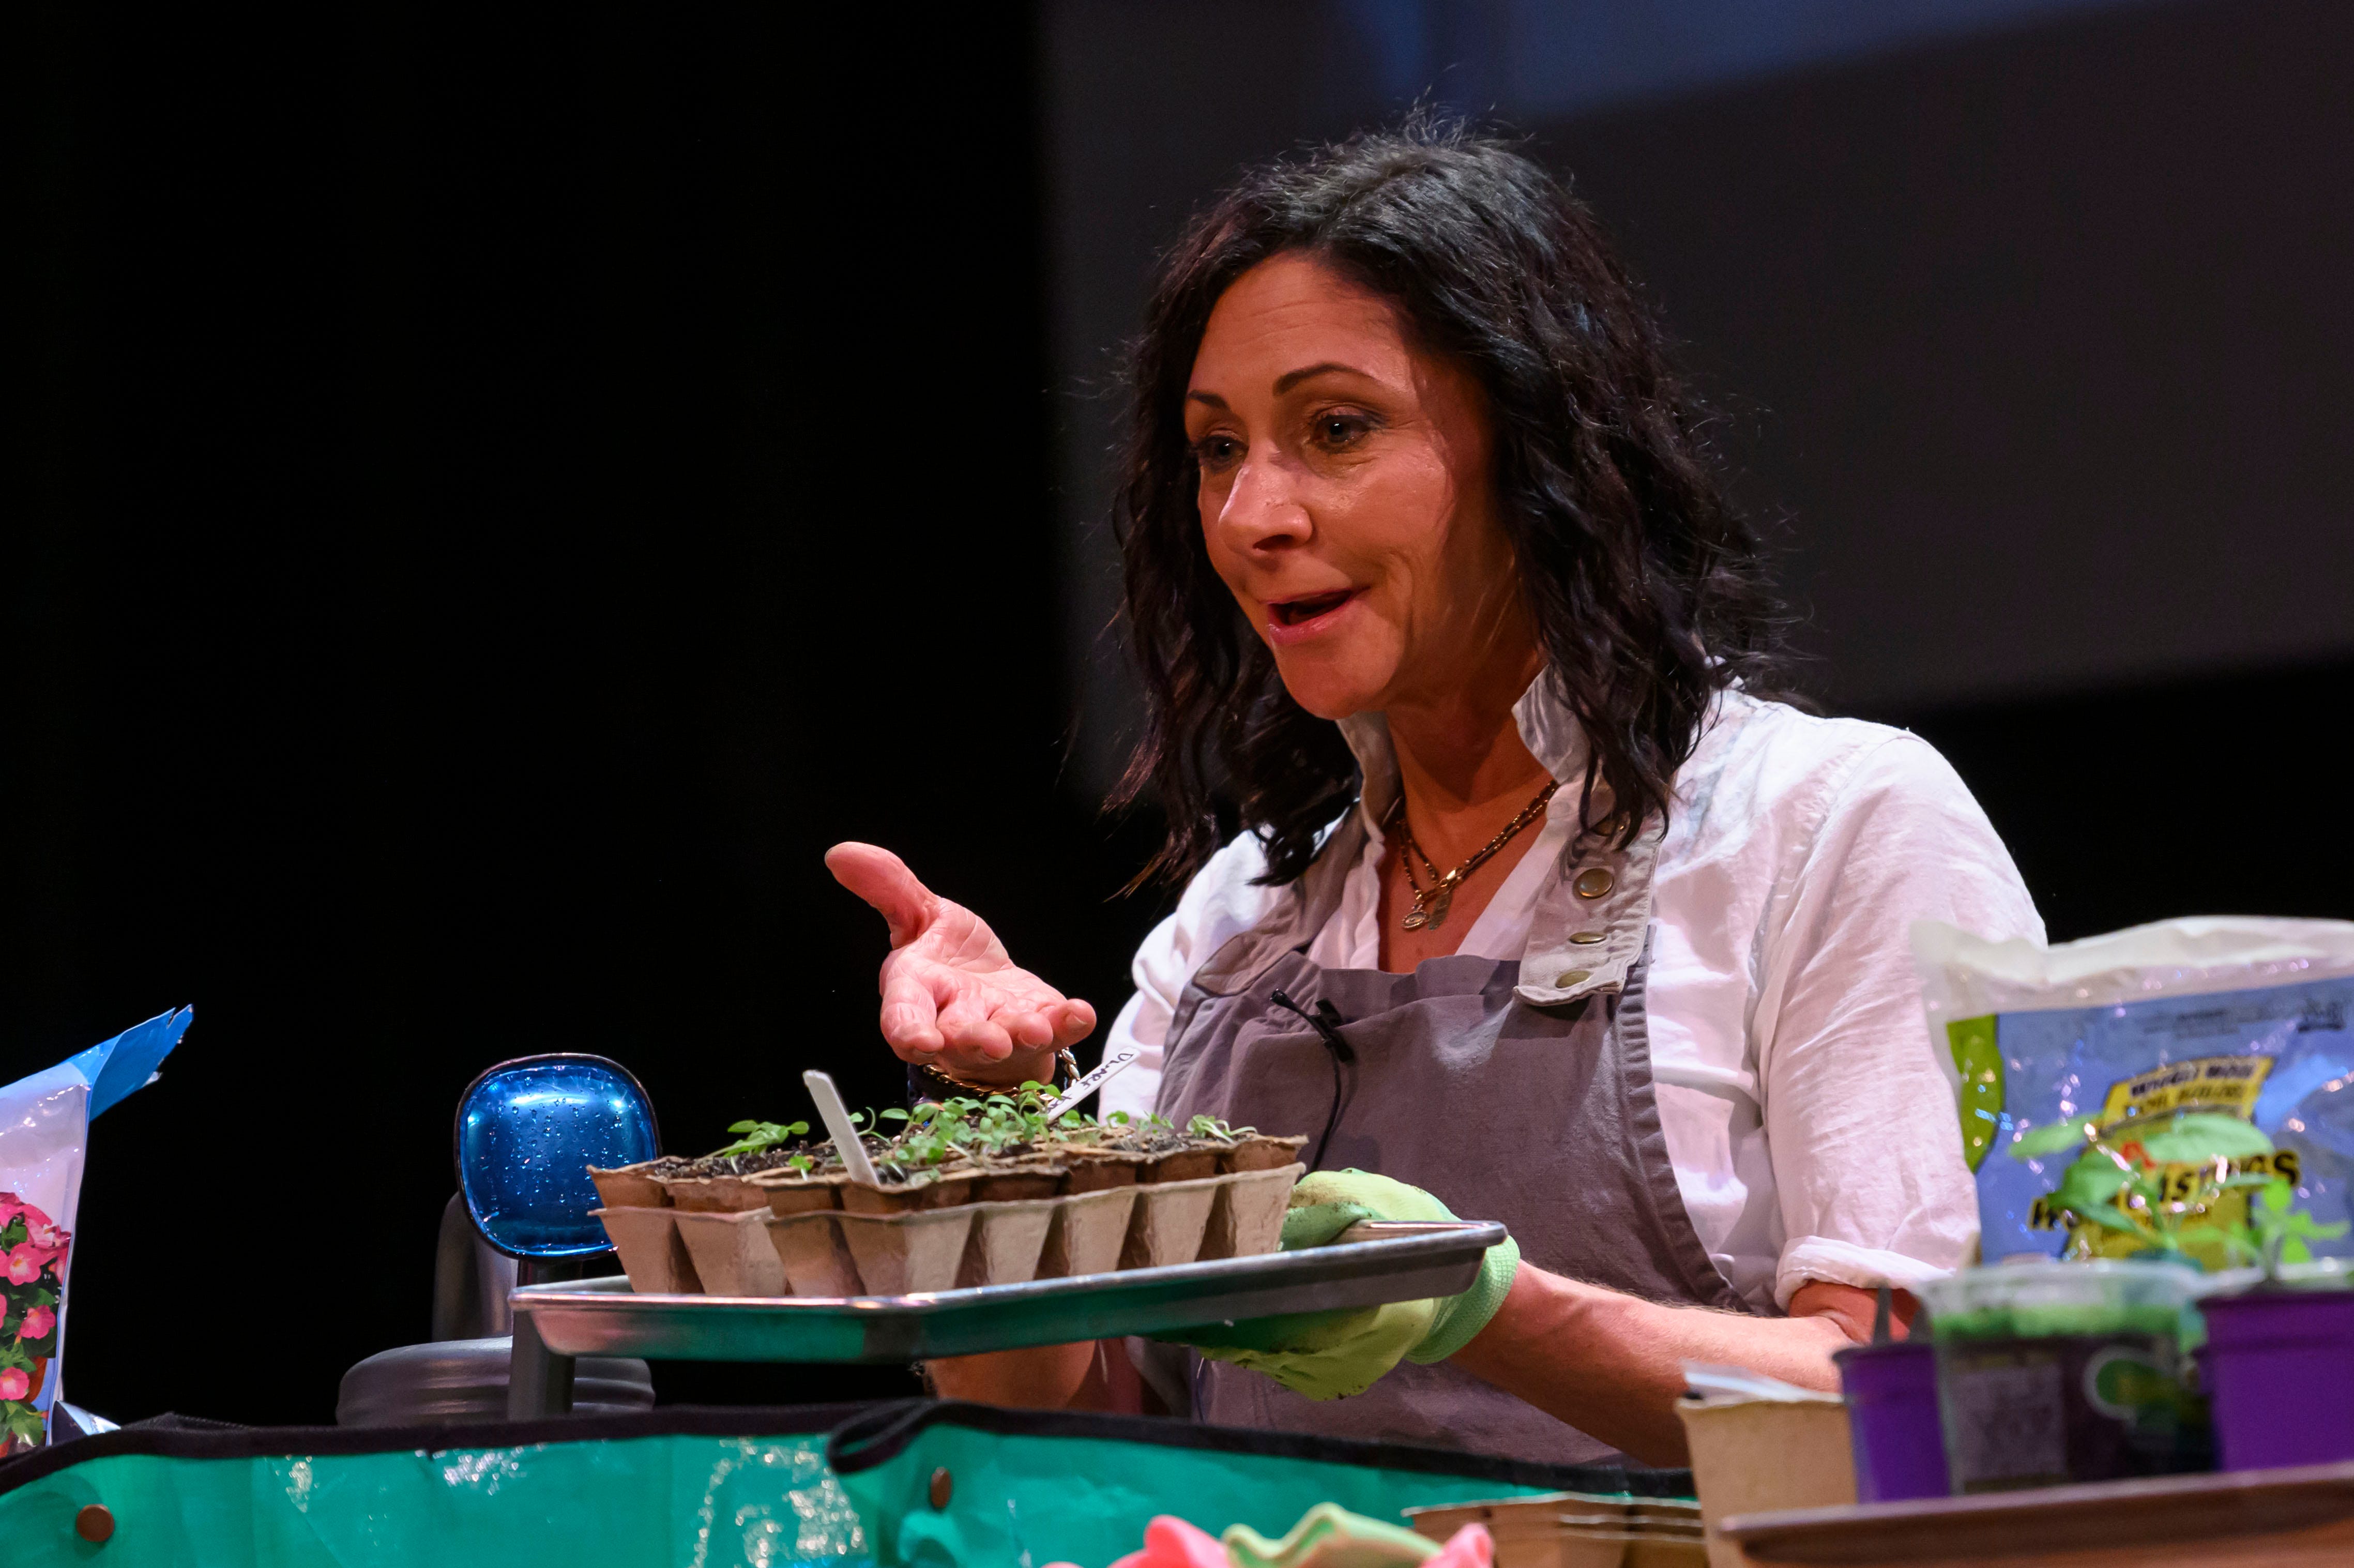 Gardener Michelle Kobernick demonstrates how to germinate seeds during the event series Dish and Design, at the Berman Center for Performing Arts, in West Bloomfield, March 20, 2024.